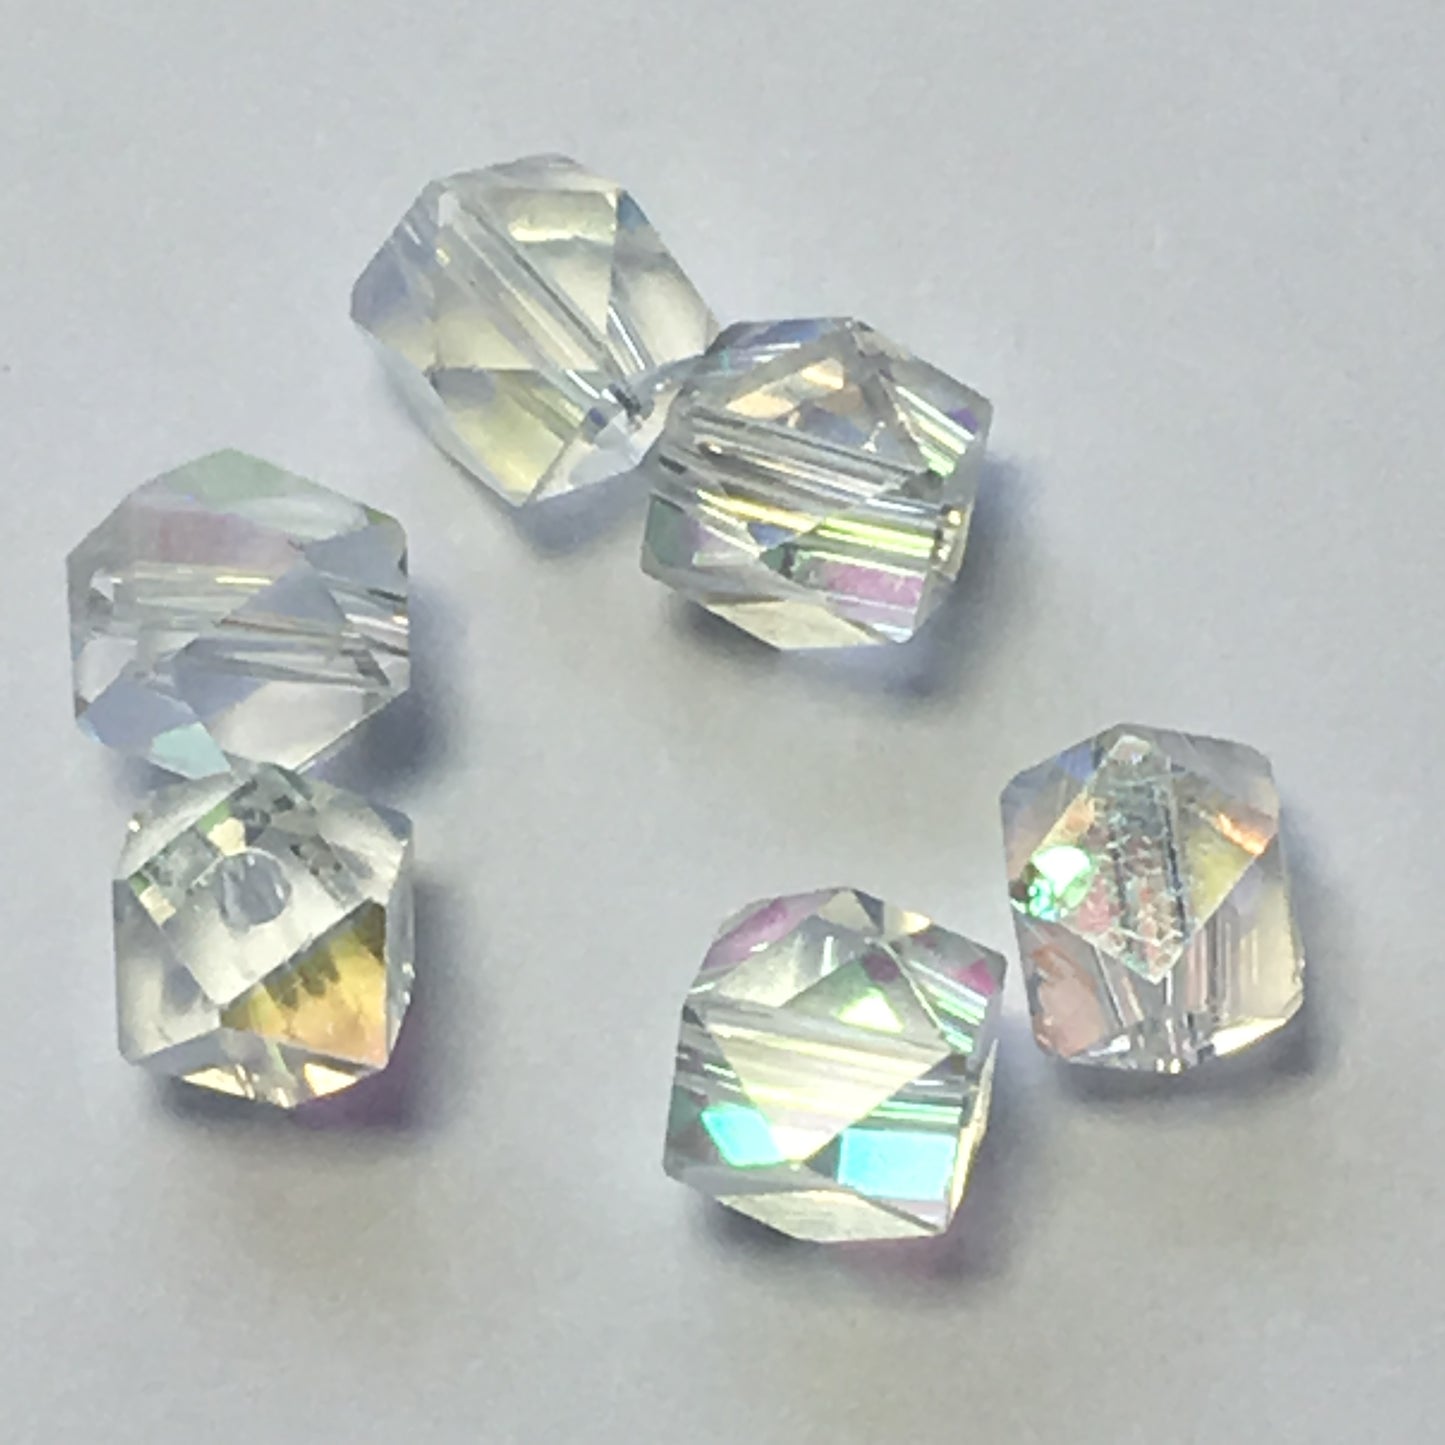 Crystal AB Fancy Cube Beads, 5 mm -  5 Beads